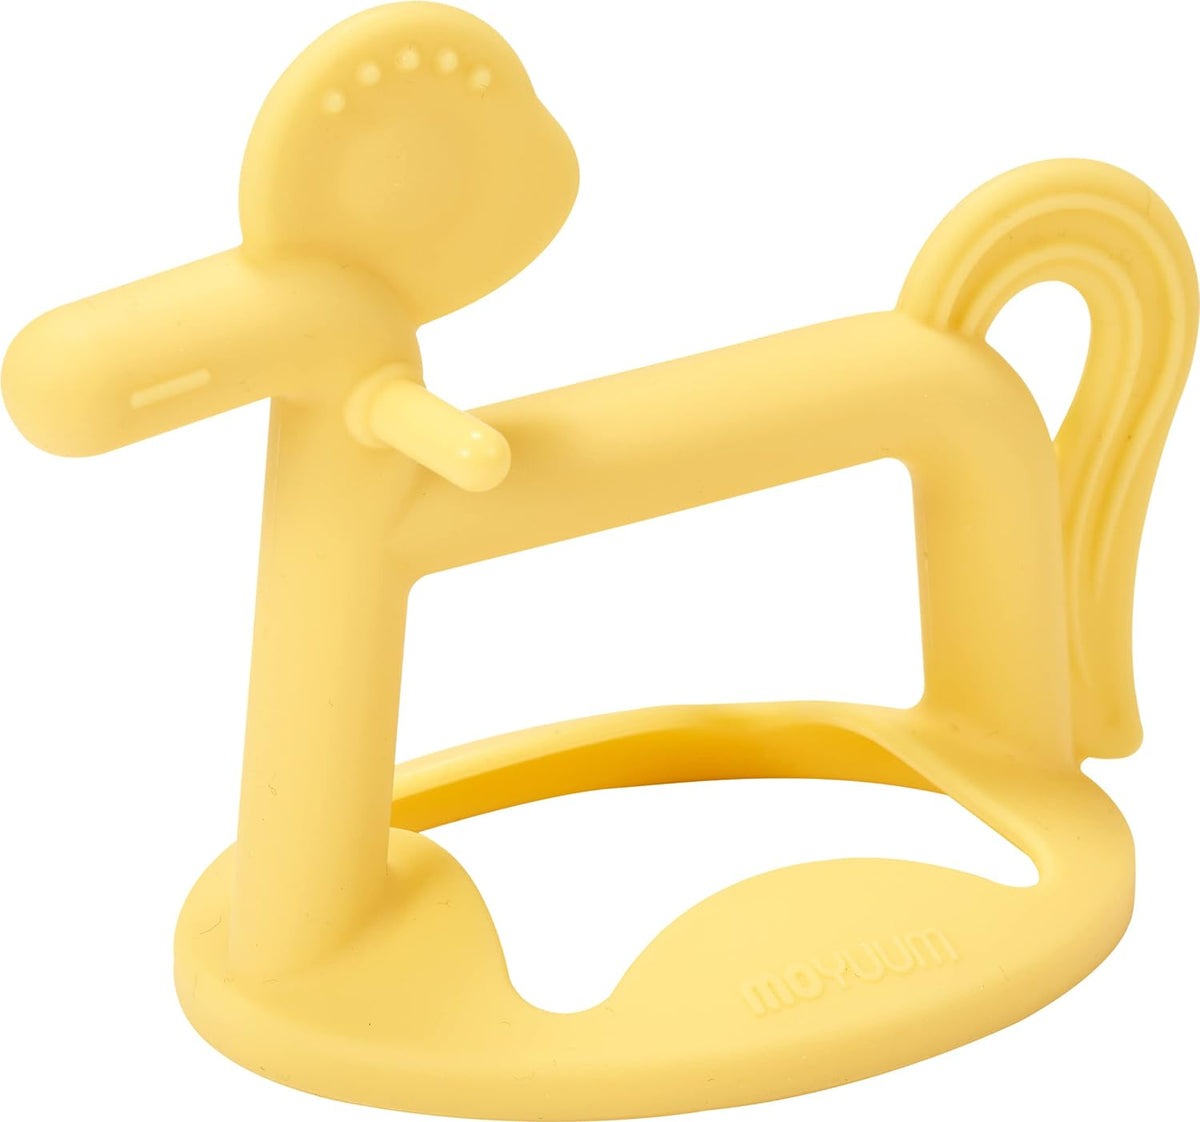 MOYUUM Gift Set Teether Swing Bird Red and Pony Yellow